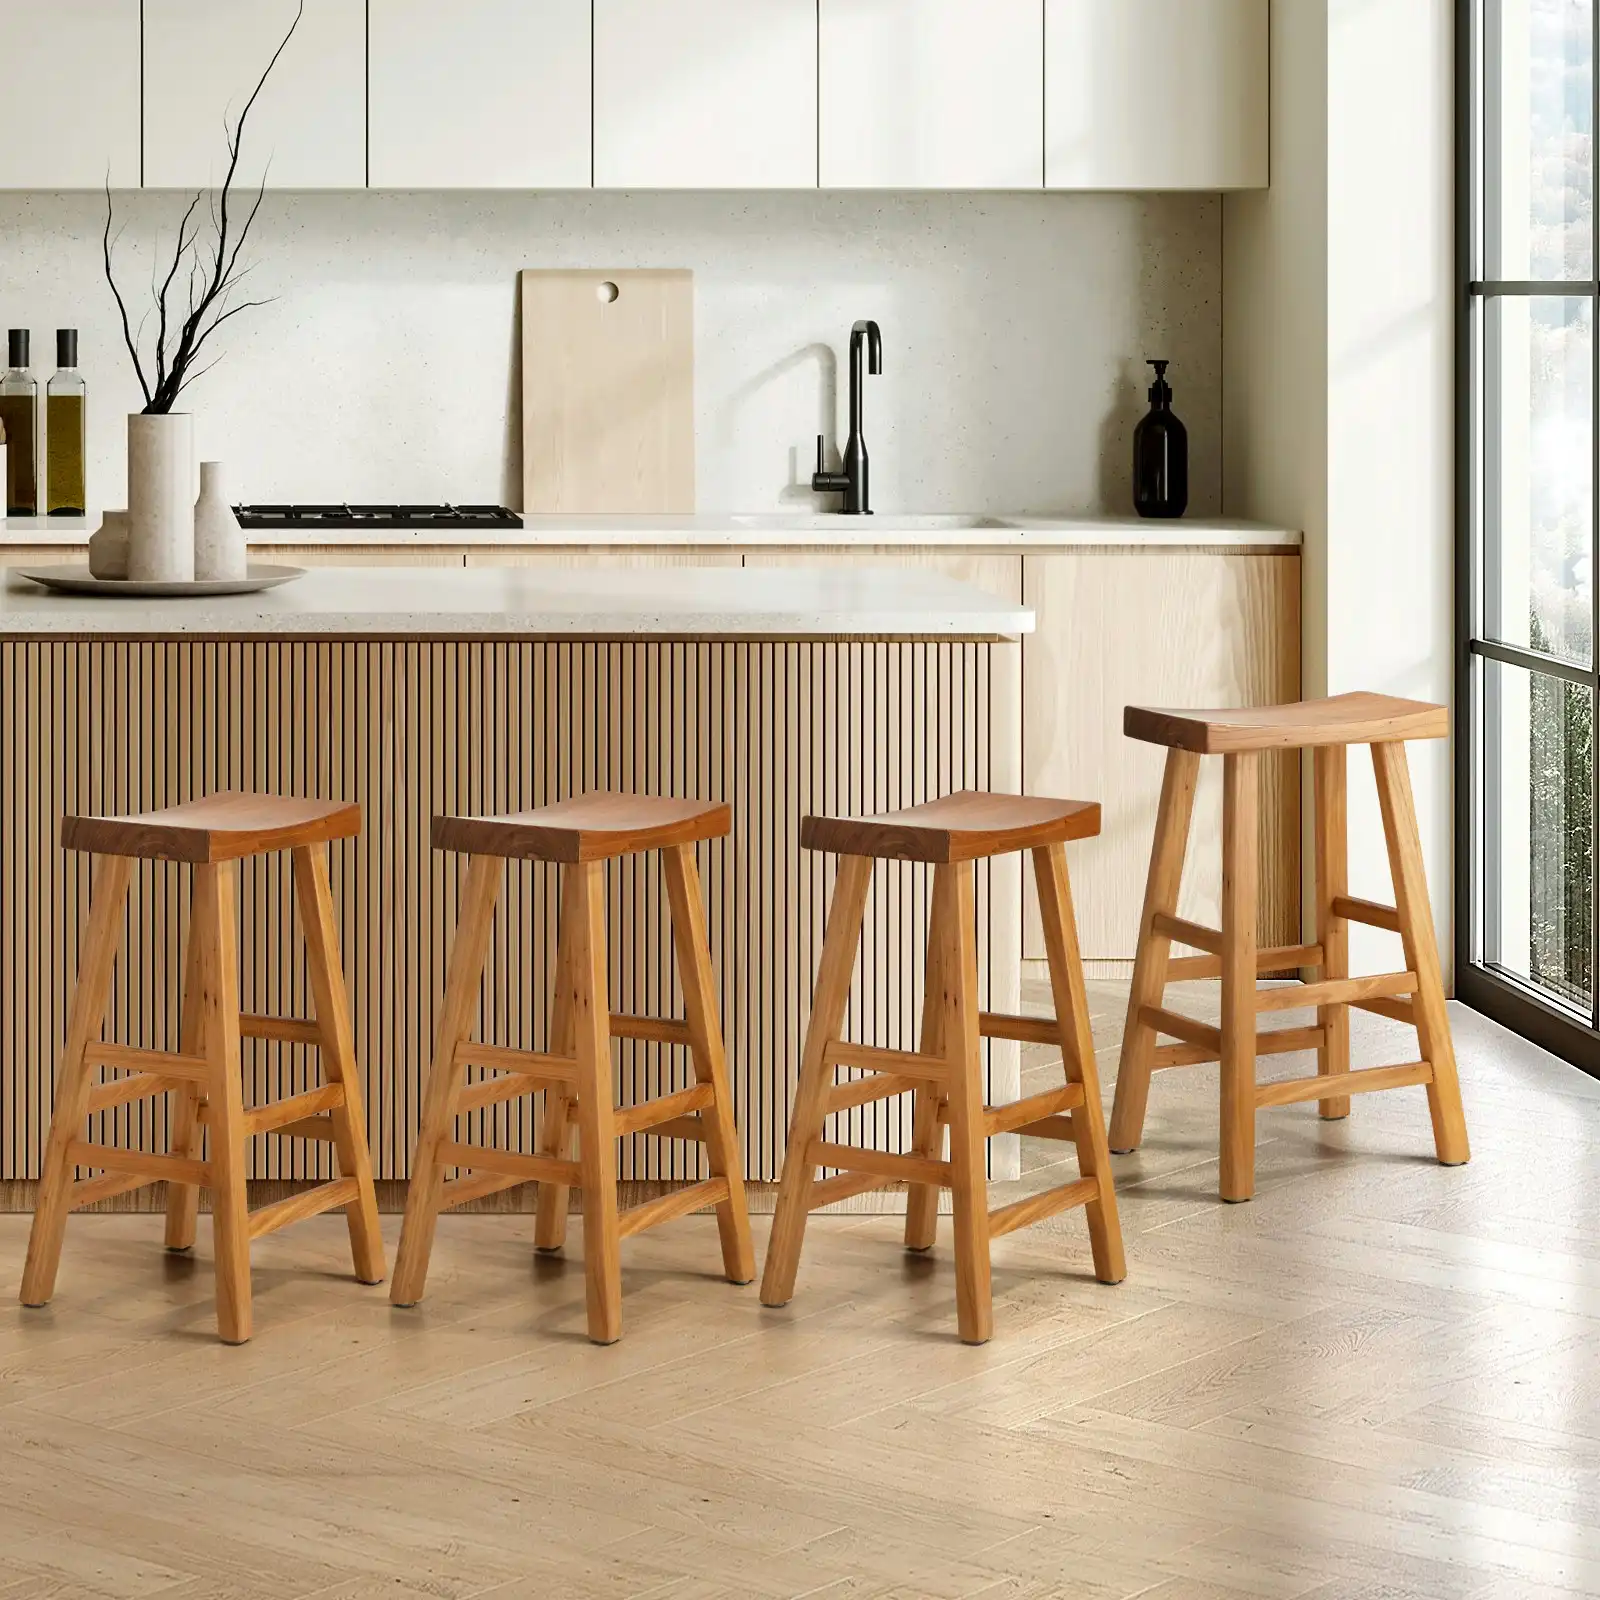 Oikiture Set of 4 Bar Stools Kitchen Stool Wooden Counter Chairs Natural